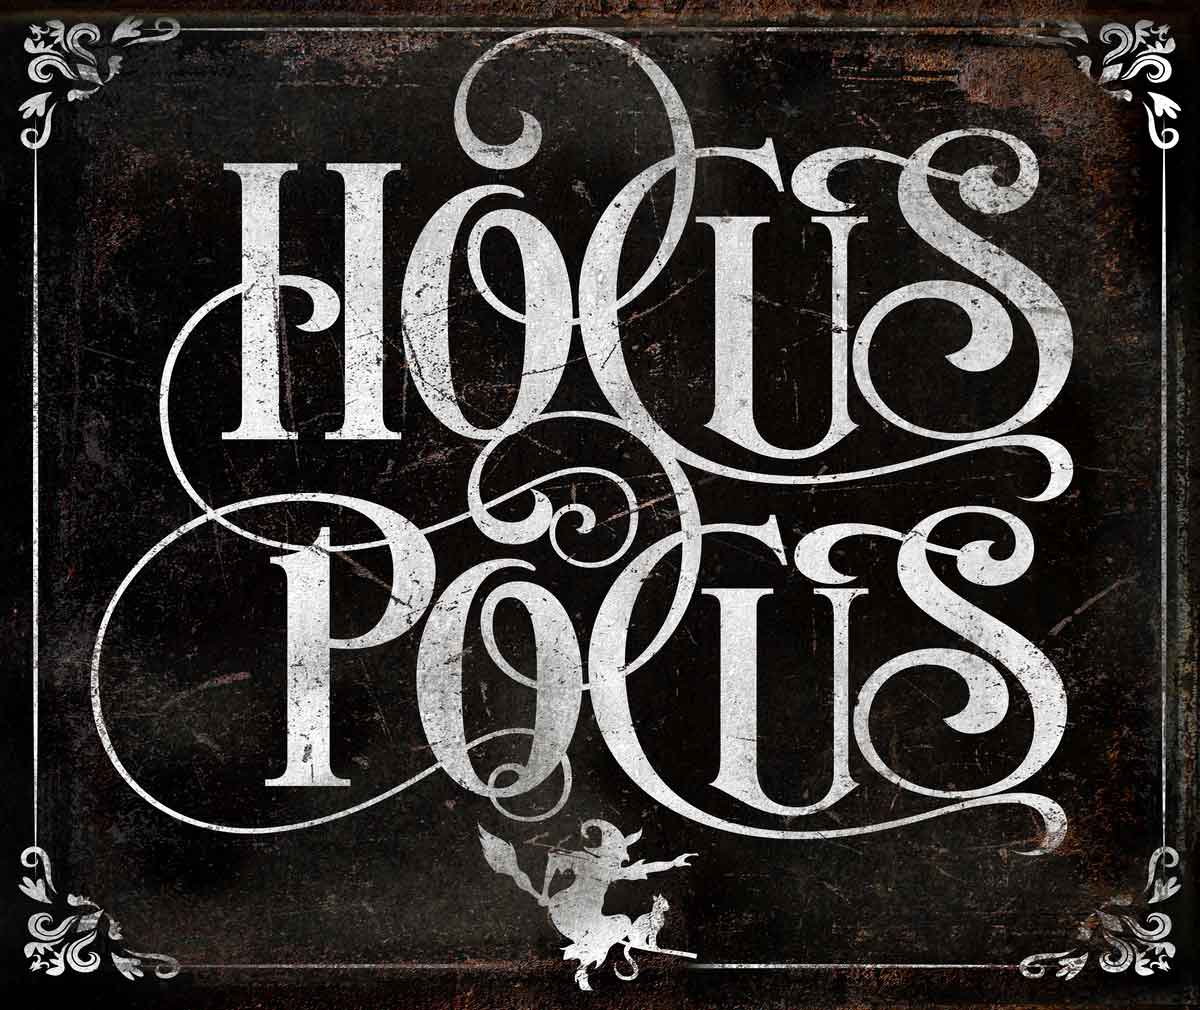 Hocus Pocus Halloween Wall Sign on distressed background and the words in fancy script Hocus Pocus and a little witch.